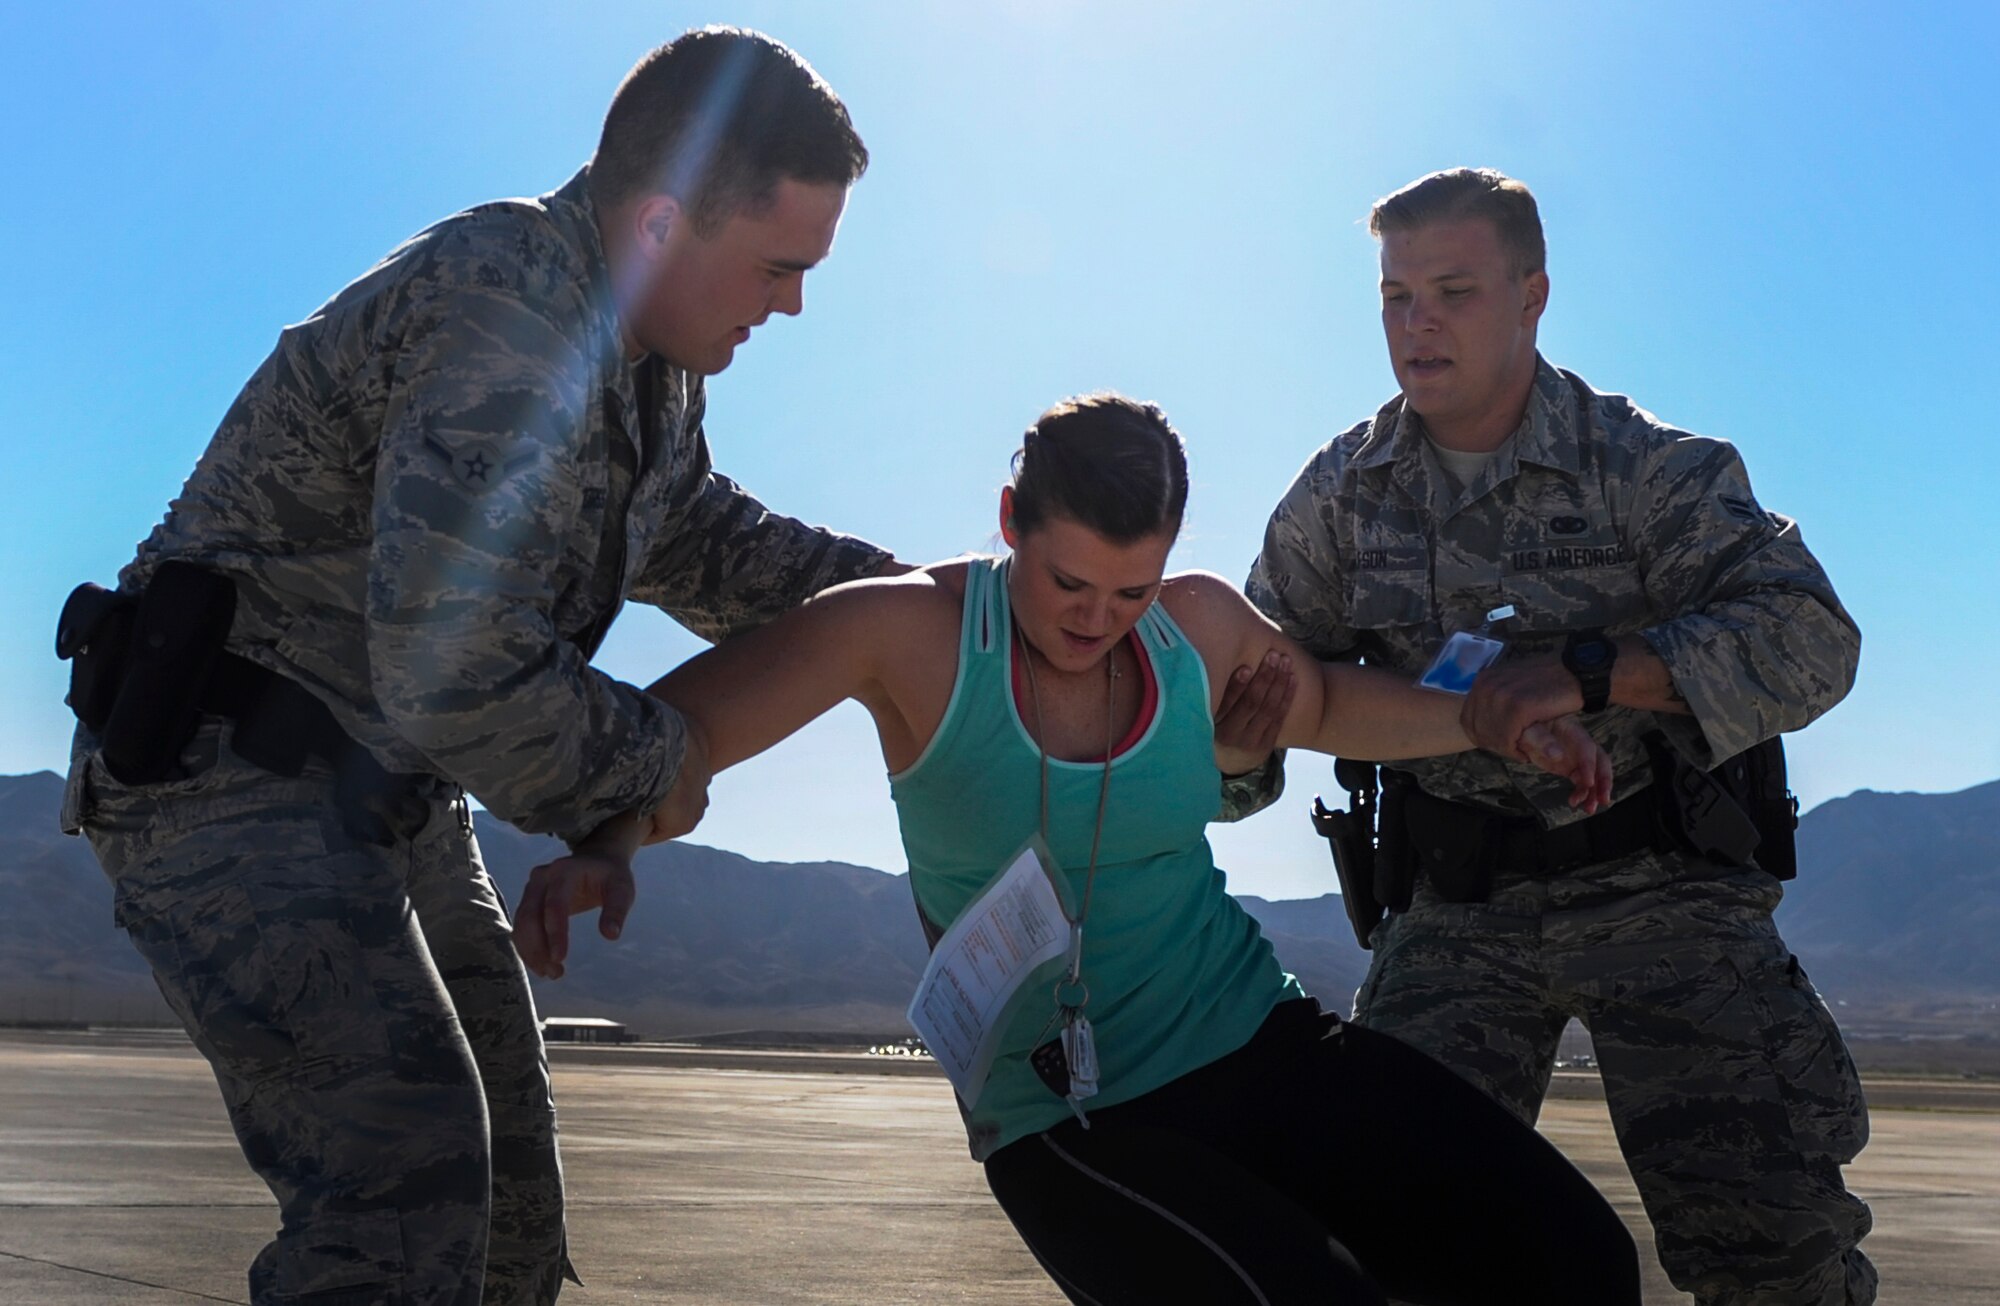 Airman Paul Morss and Airman 1st Class Wade Alfson, 99th Security Forces Squadron security forces members, help a simulated casualty to her feet during the Major Accident Recovery Exercise at Nellis Air Force Base, Nev., Oct. 13, 2016. The 99th SFS being the first on-scene of an emergency situation on base, has a wide range of responsibilities, including securing the scene and taking care of injured. (U.S. Air Force photo by Airman 1st Class Kevin Tanenbaum/Released)